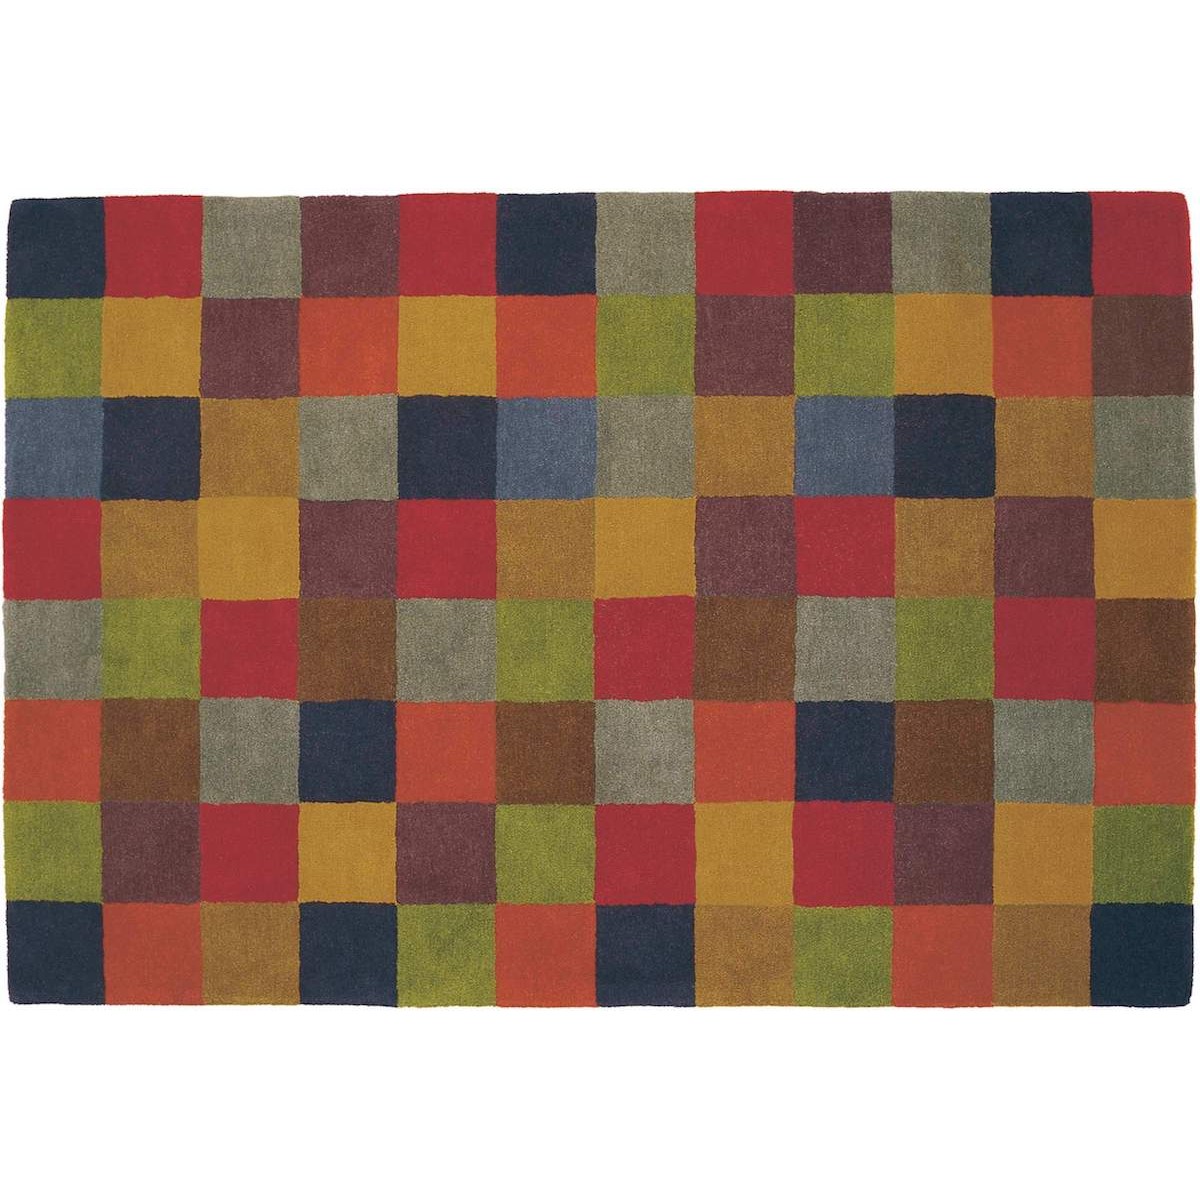 SOLD OUT 85x135cm - Cuadros 1996 rug